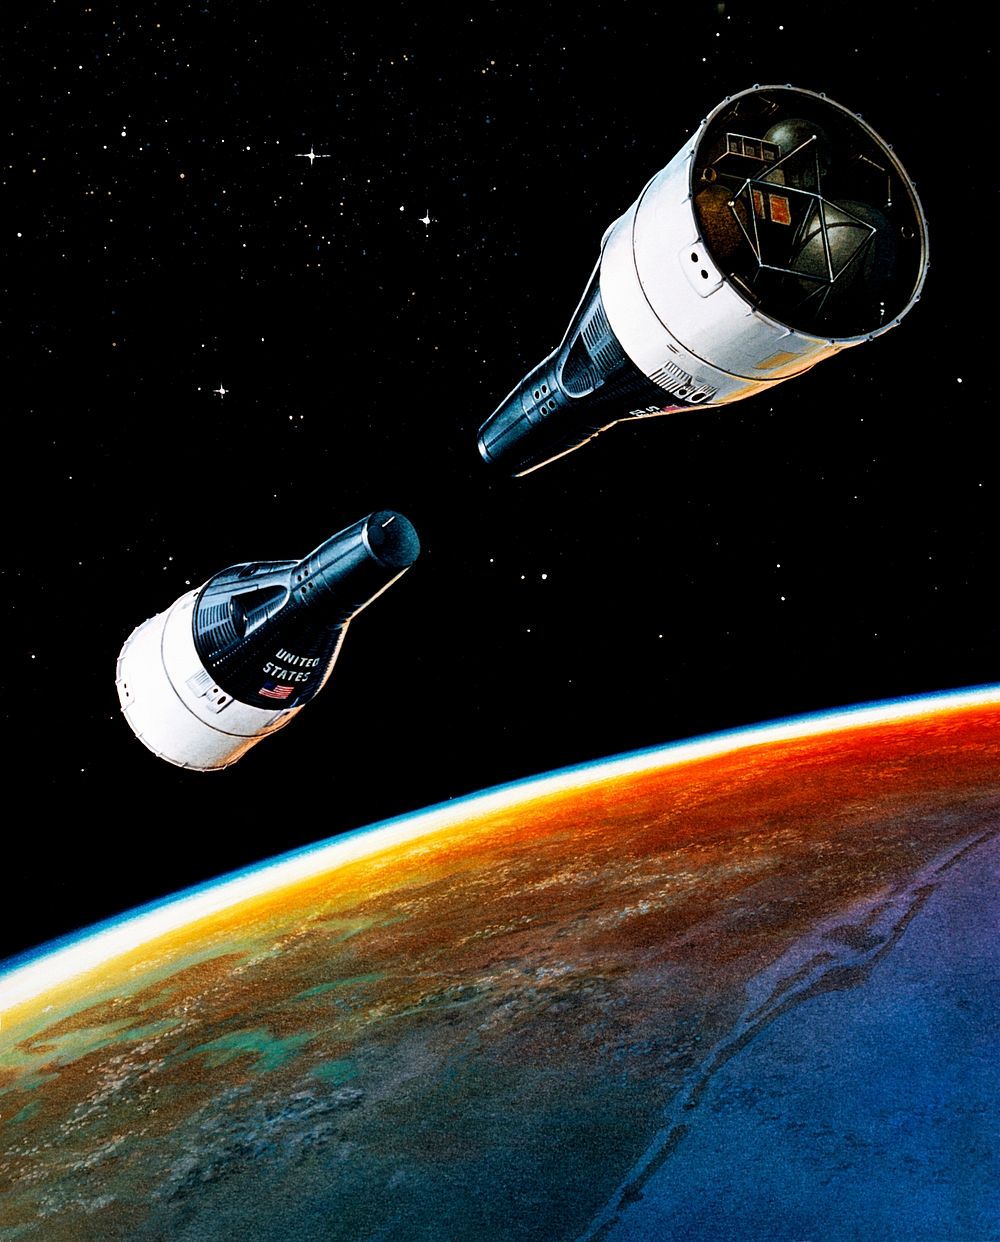 Artist's concept of positions of Gemini 6 and 7 spacecrafts at the terminal phase of the proposed rendezvous mission.…